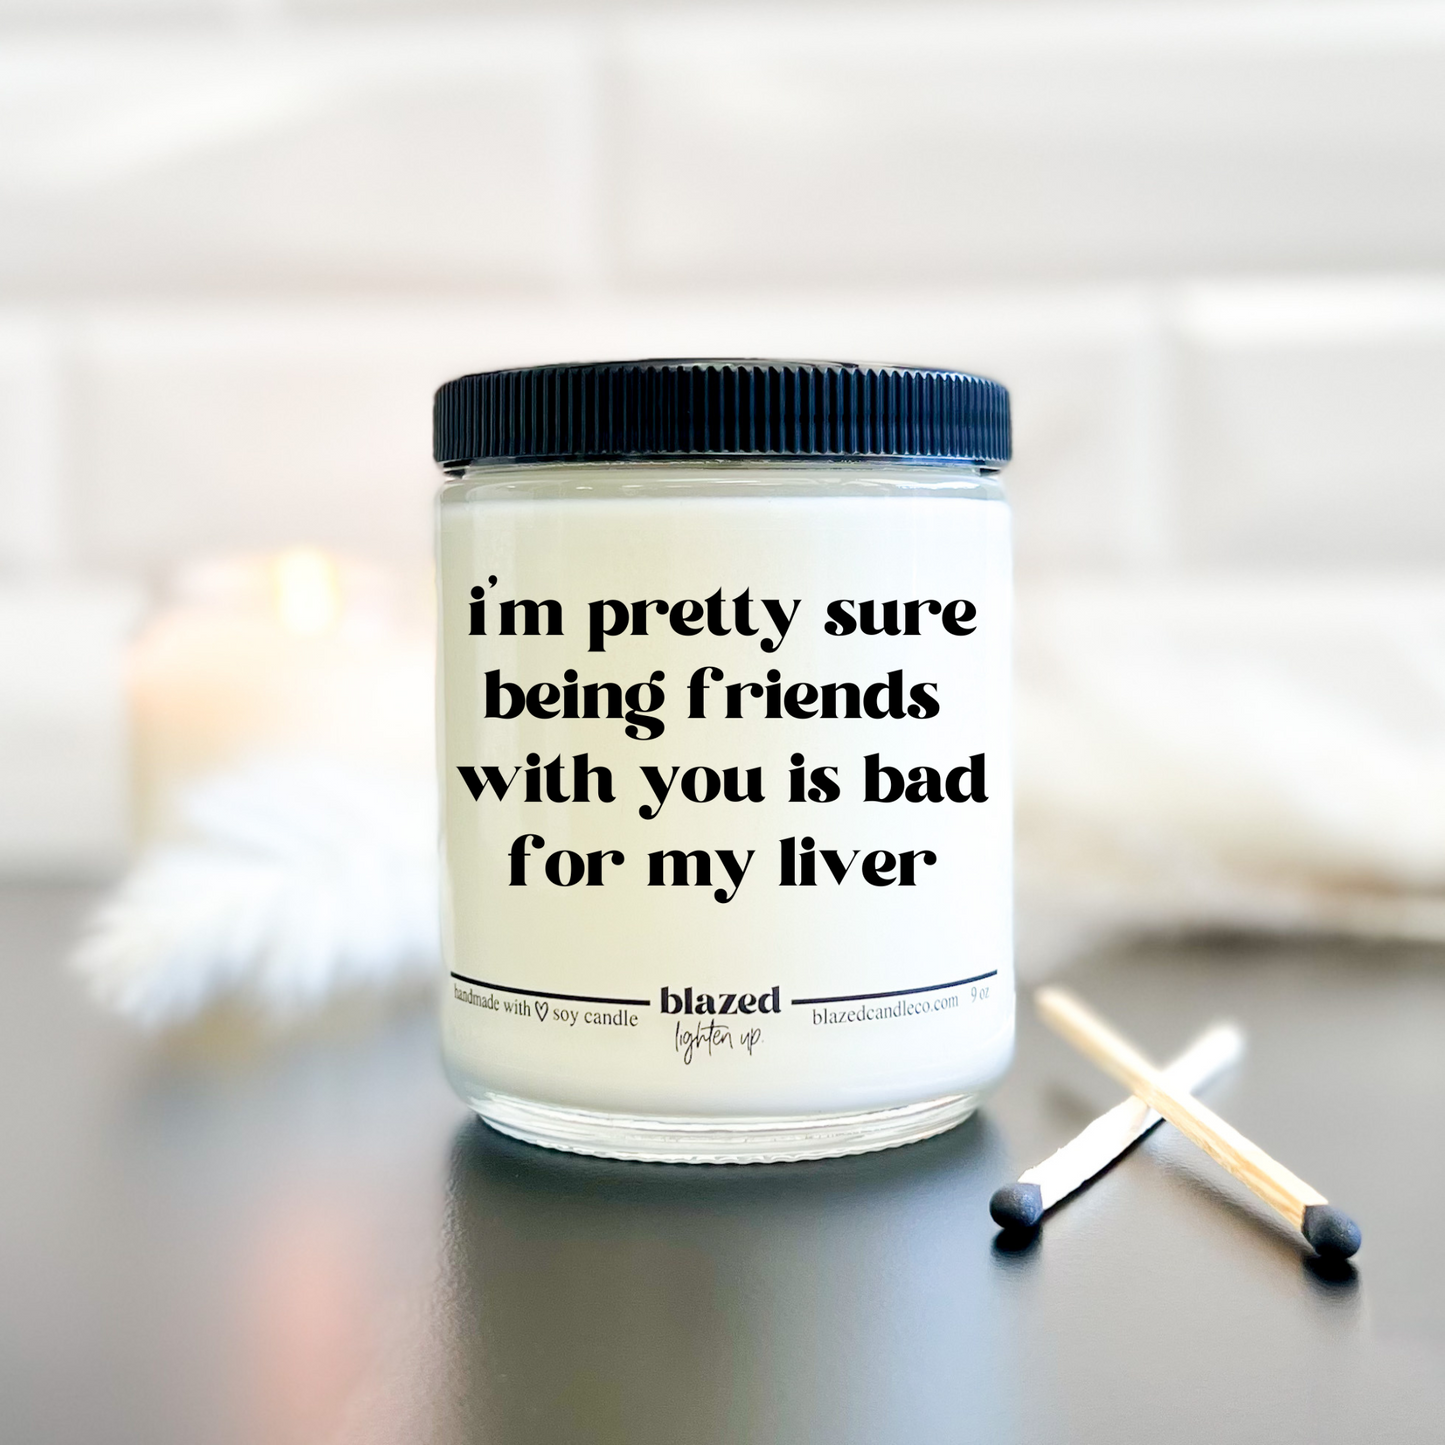 Being Friends With You Is Bad For My Liver - Candle